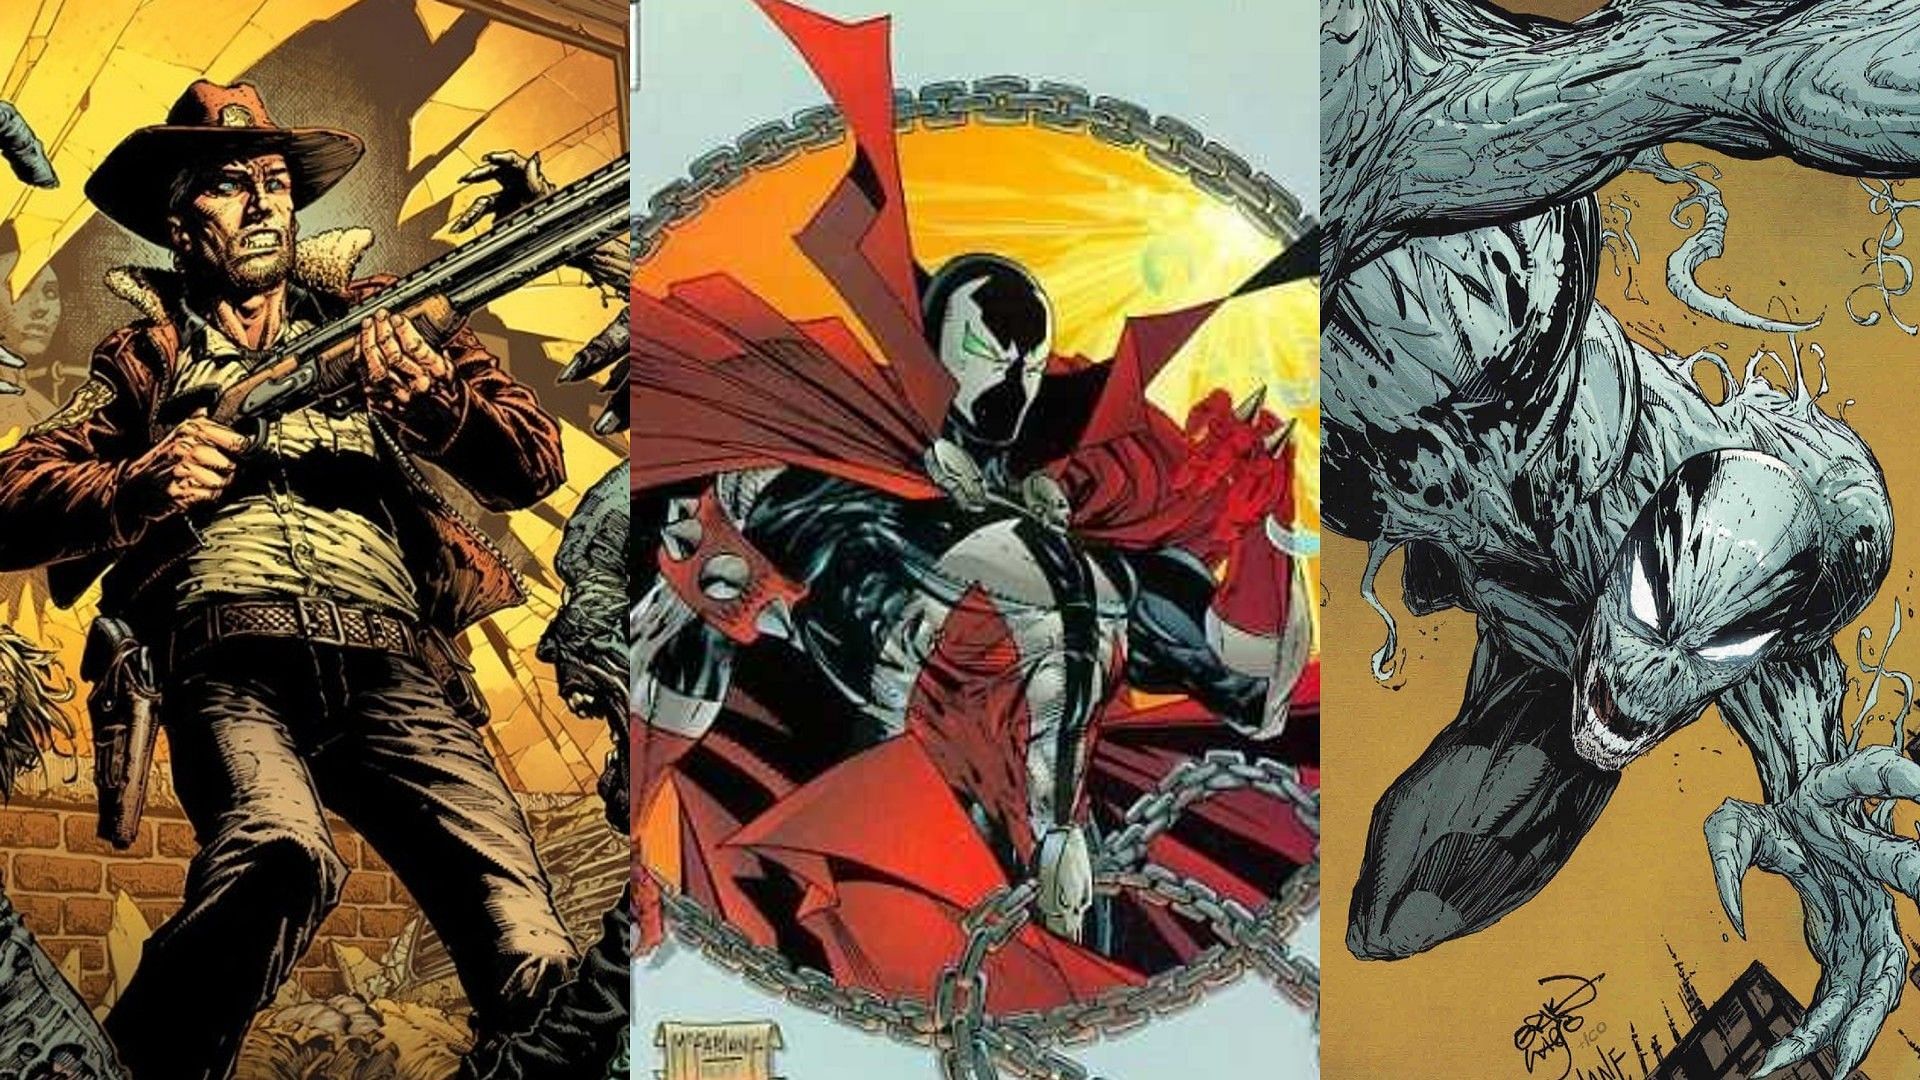 The Walking Dead, Spawn, and Haunt (Images via Image Comics)